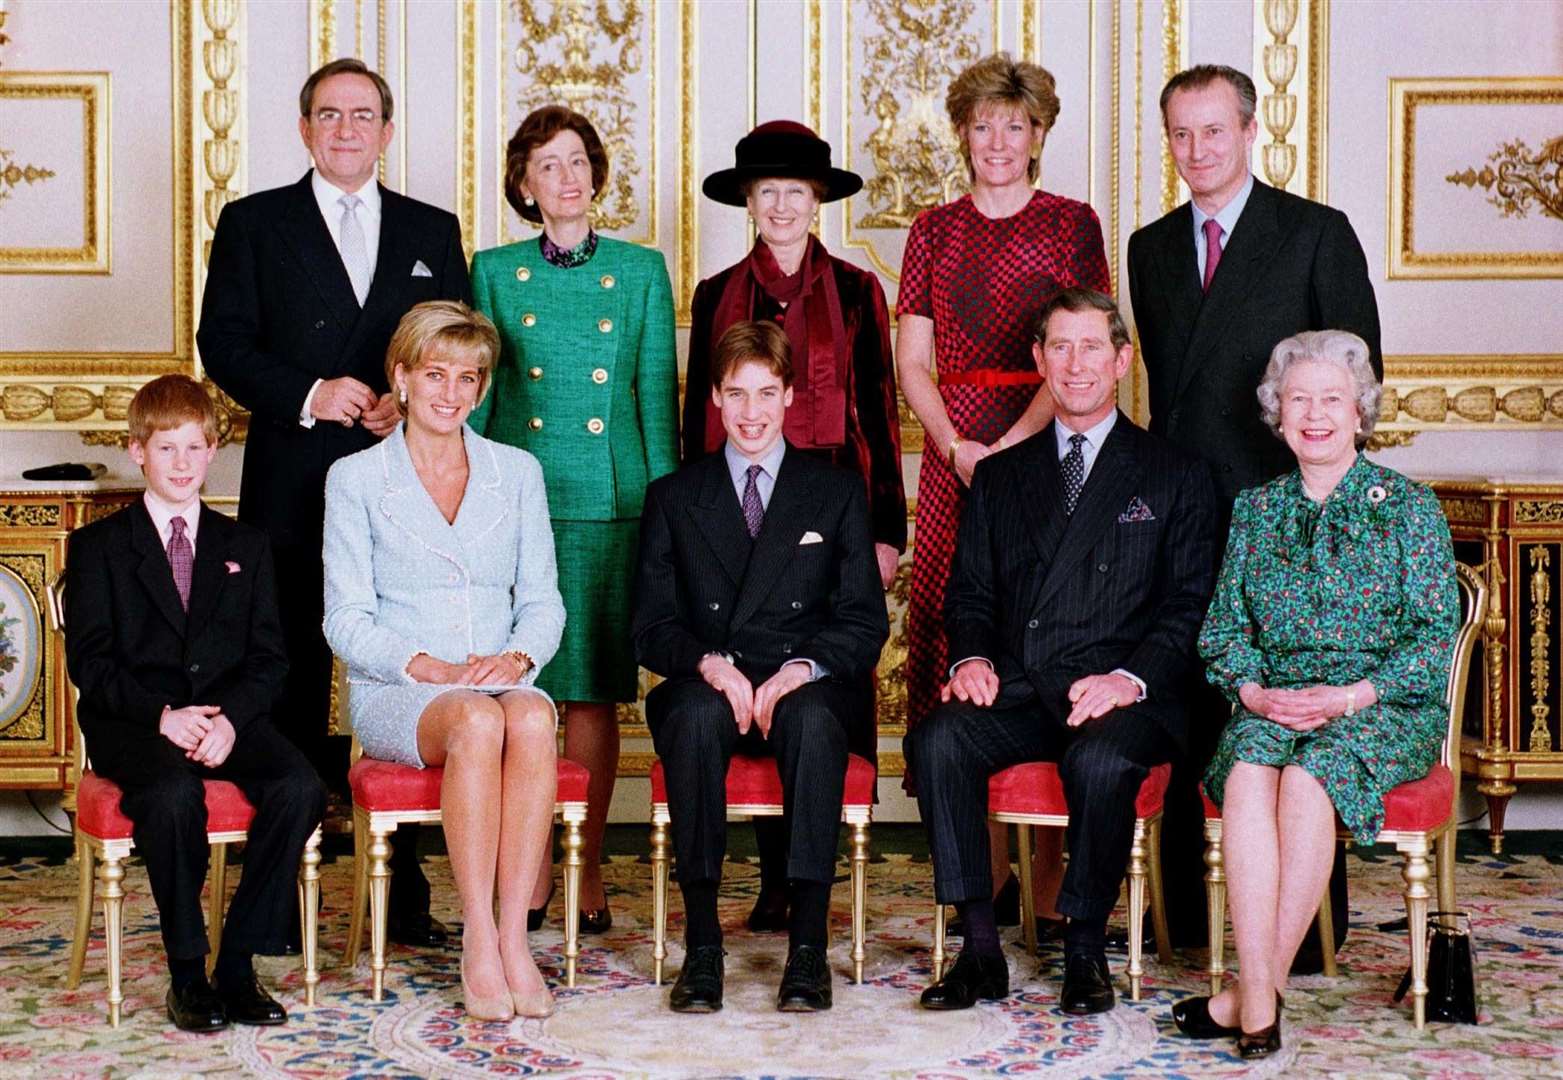 King Constantine (back left) with the royal family on the day of Prince William’s confirmation in 1997 (John Stillwell/PA)